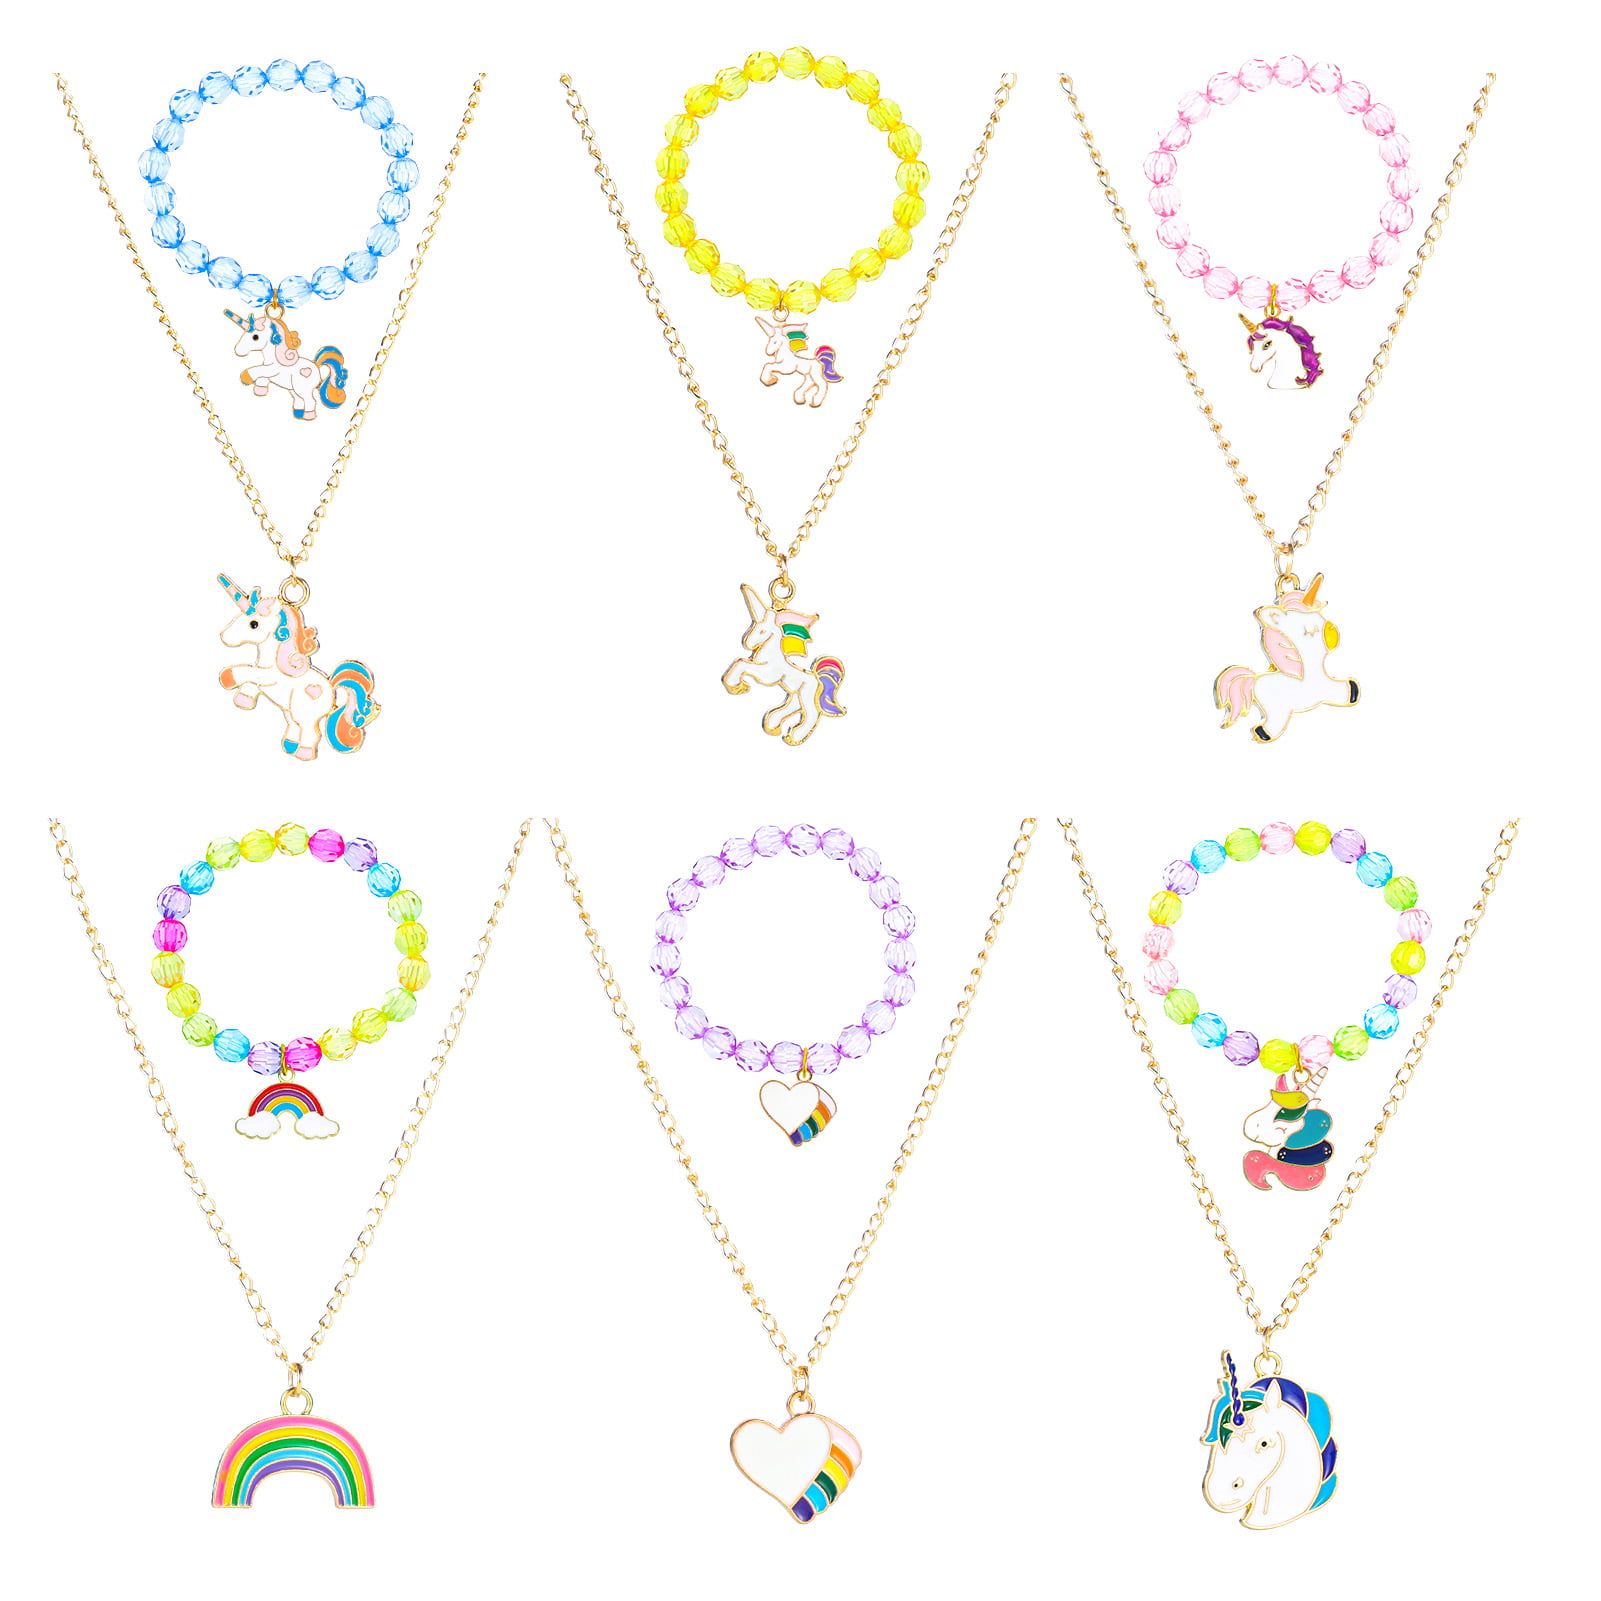 BB-GG, BGSHEMNI 8 Pcs Girls Necklaces and Bracelets Set with Unicorn Star Heart Necklace Toddler Jewelry Gift Toy Party Favors Dress Up Play Costume